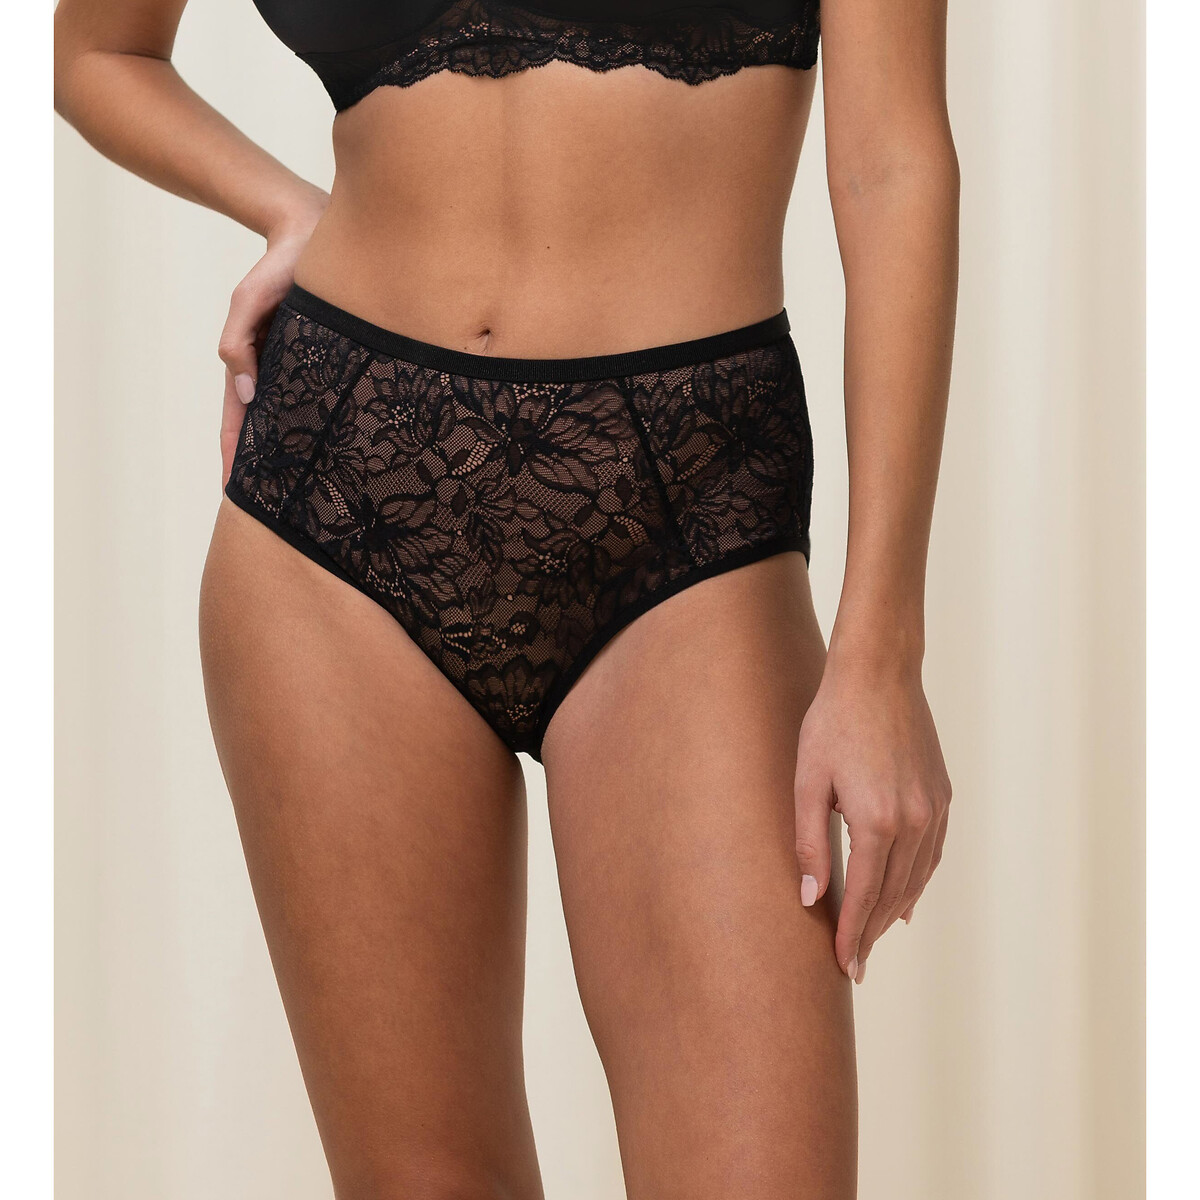 Image of Amourette Charm Maxi Knickers